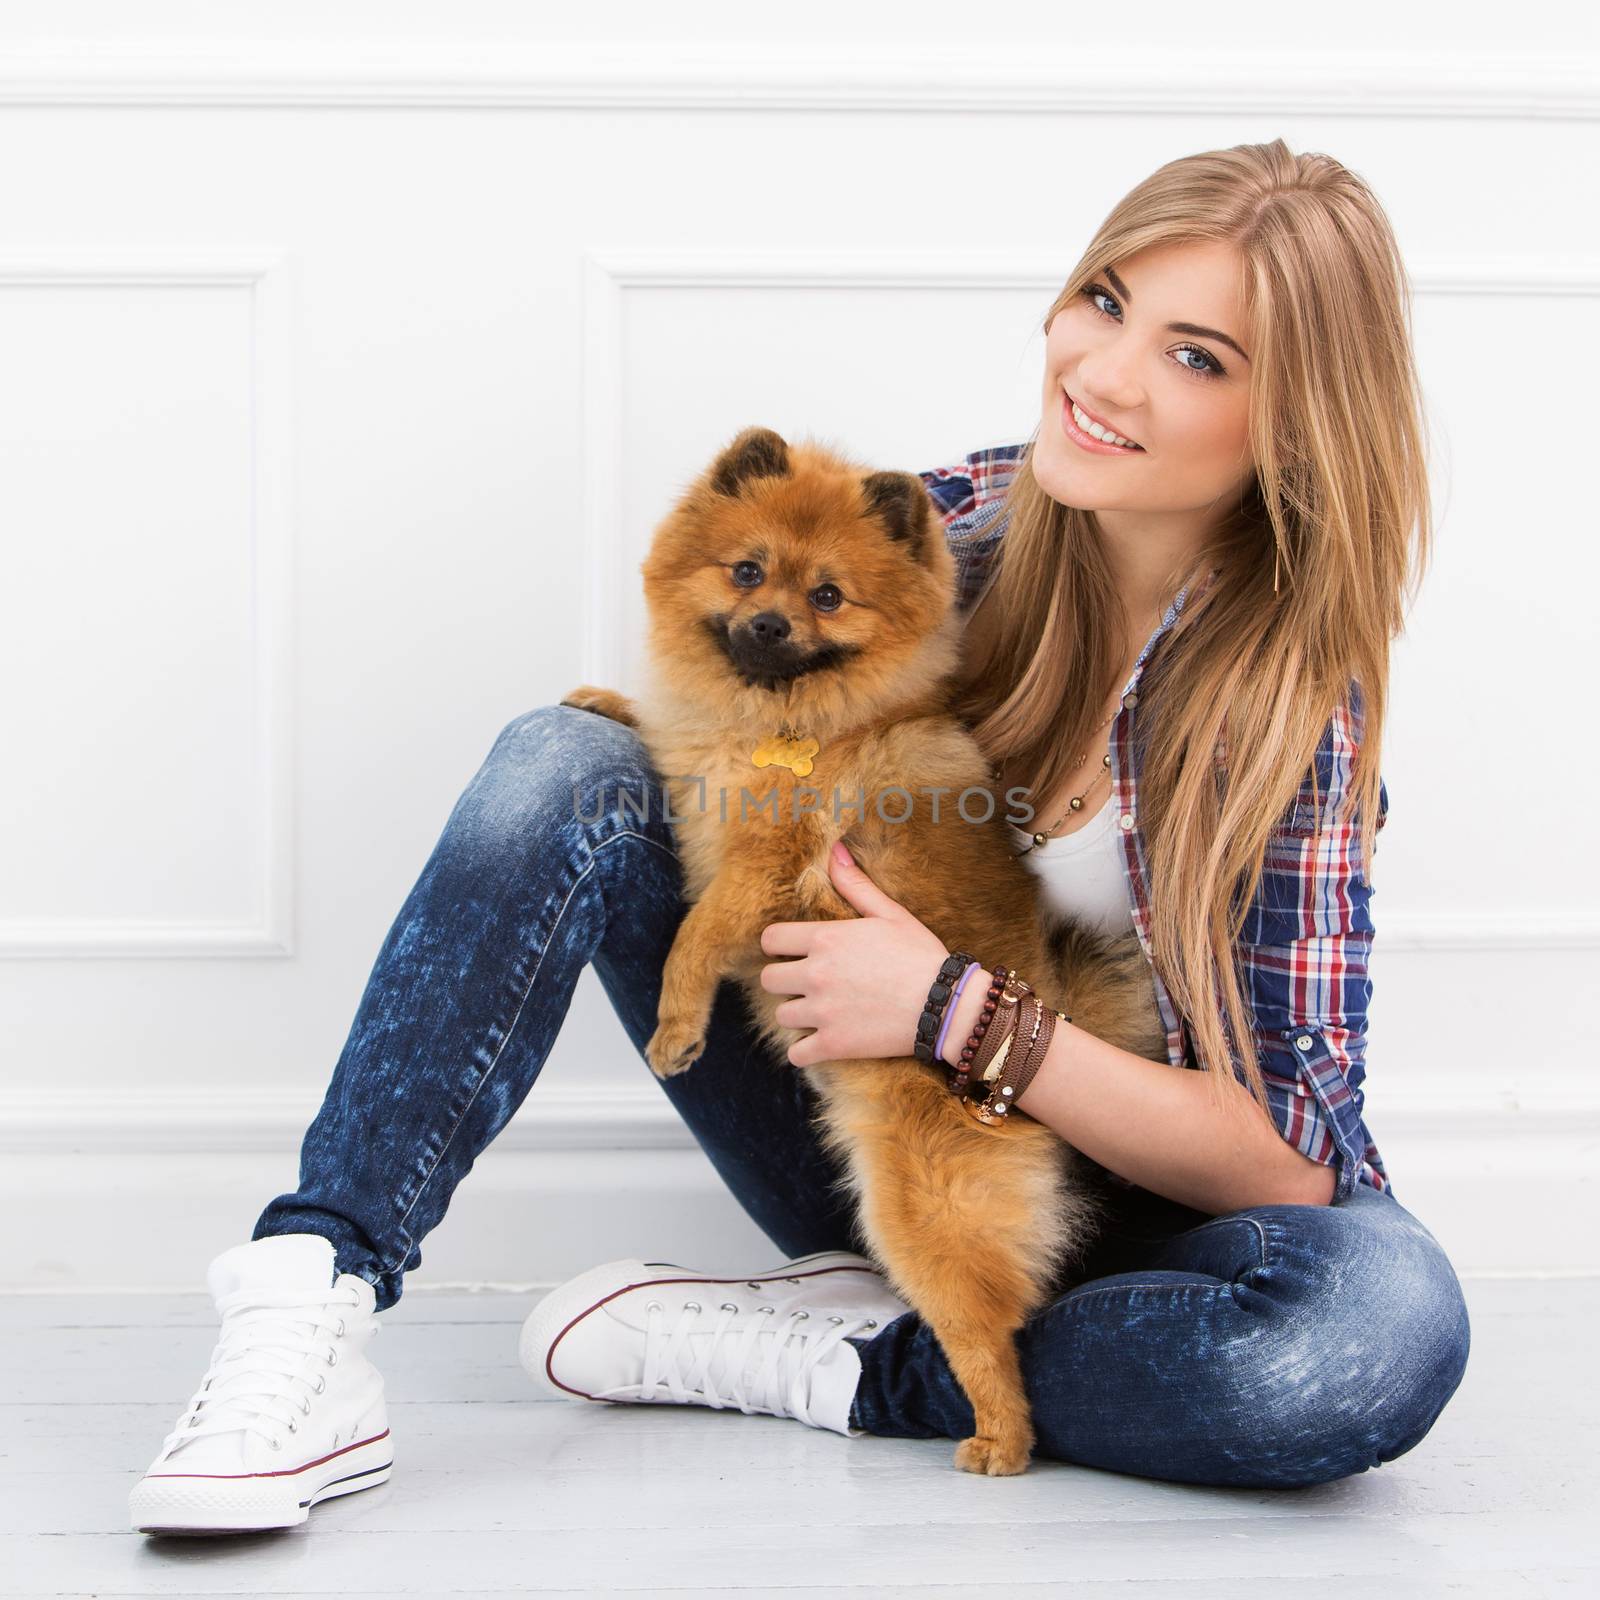 Cute, attractive girl with fluffy dog